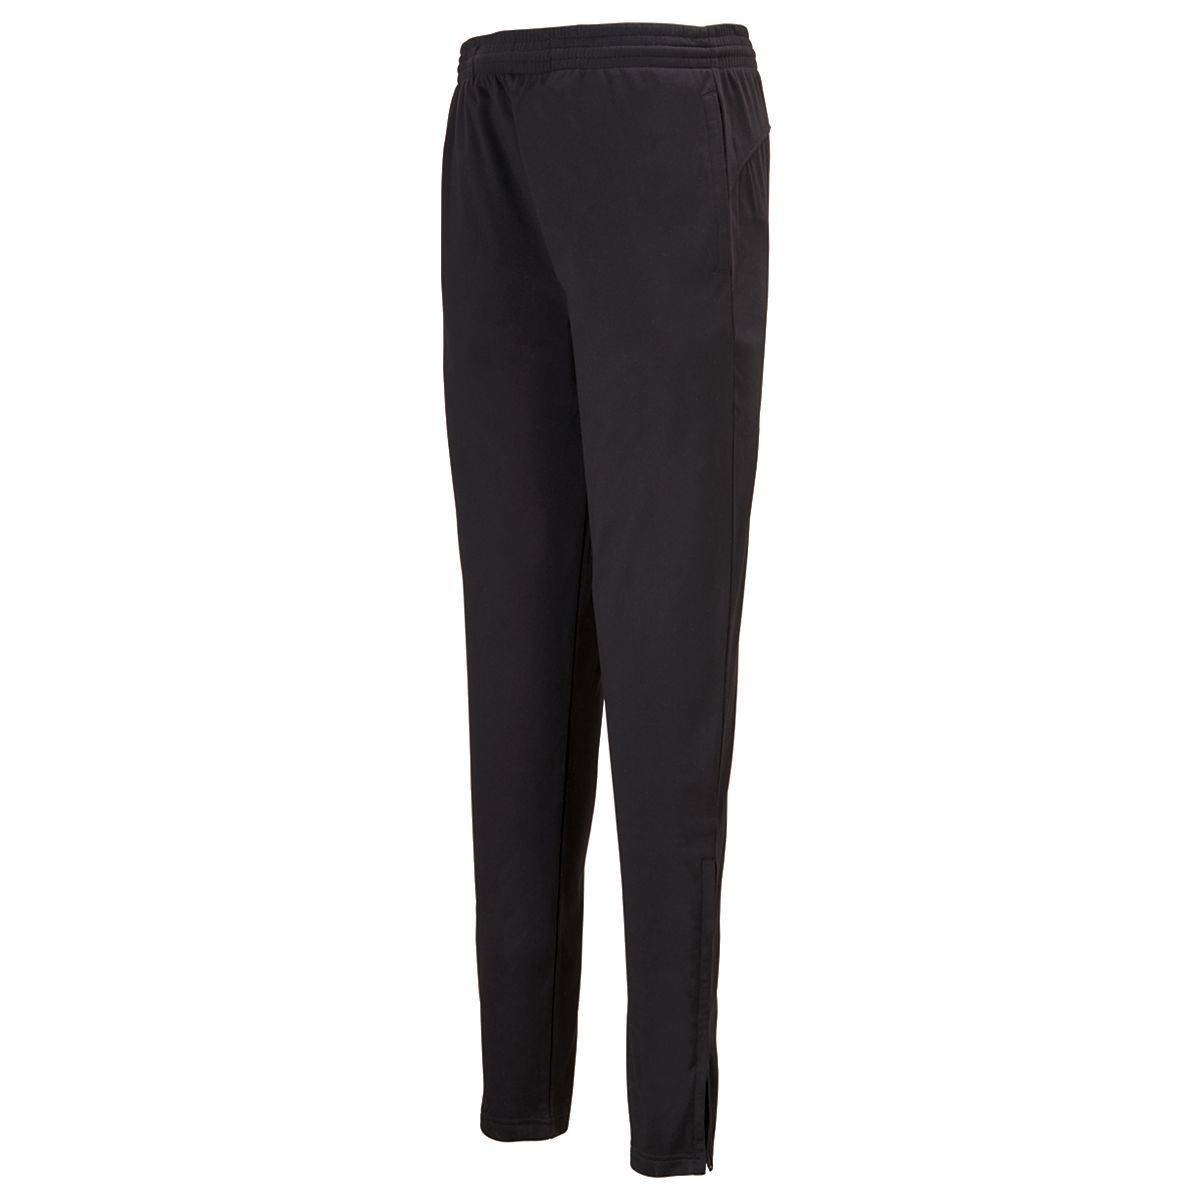 Augusta Tapered Leg Pants with Zipper Ankles - Optional